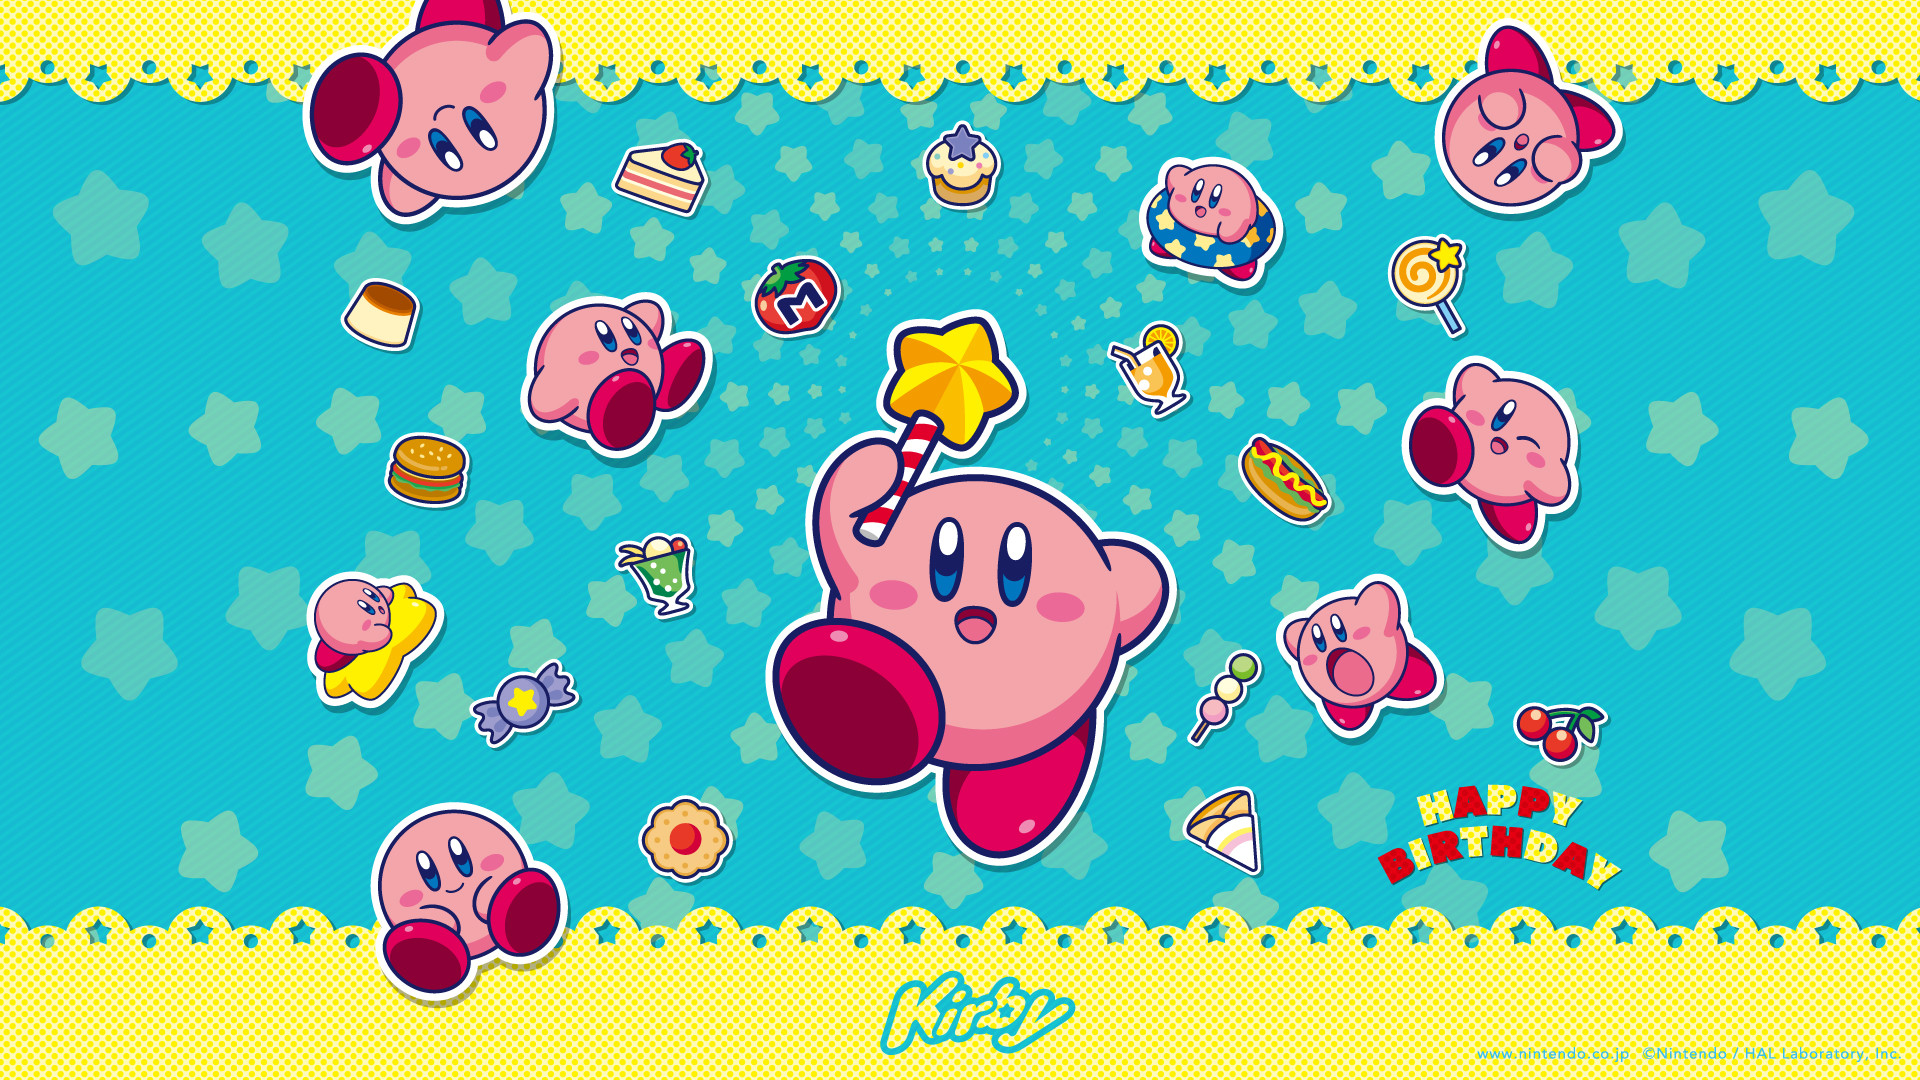 Kirby Happy Birthday official wallpaper available